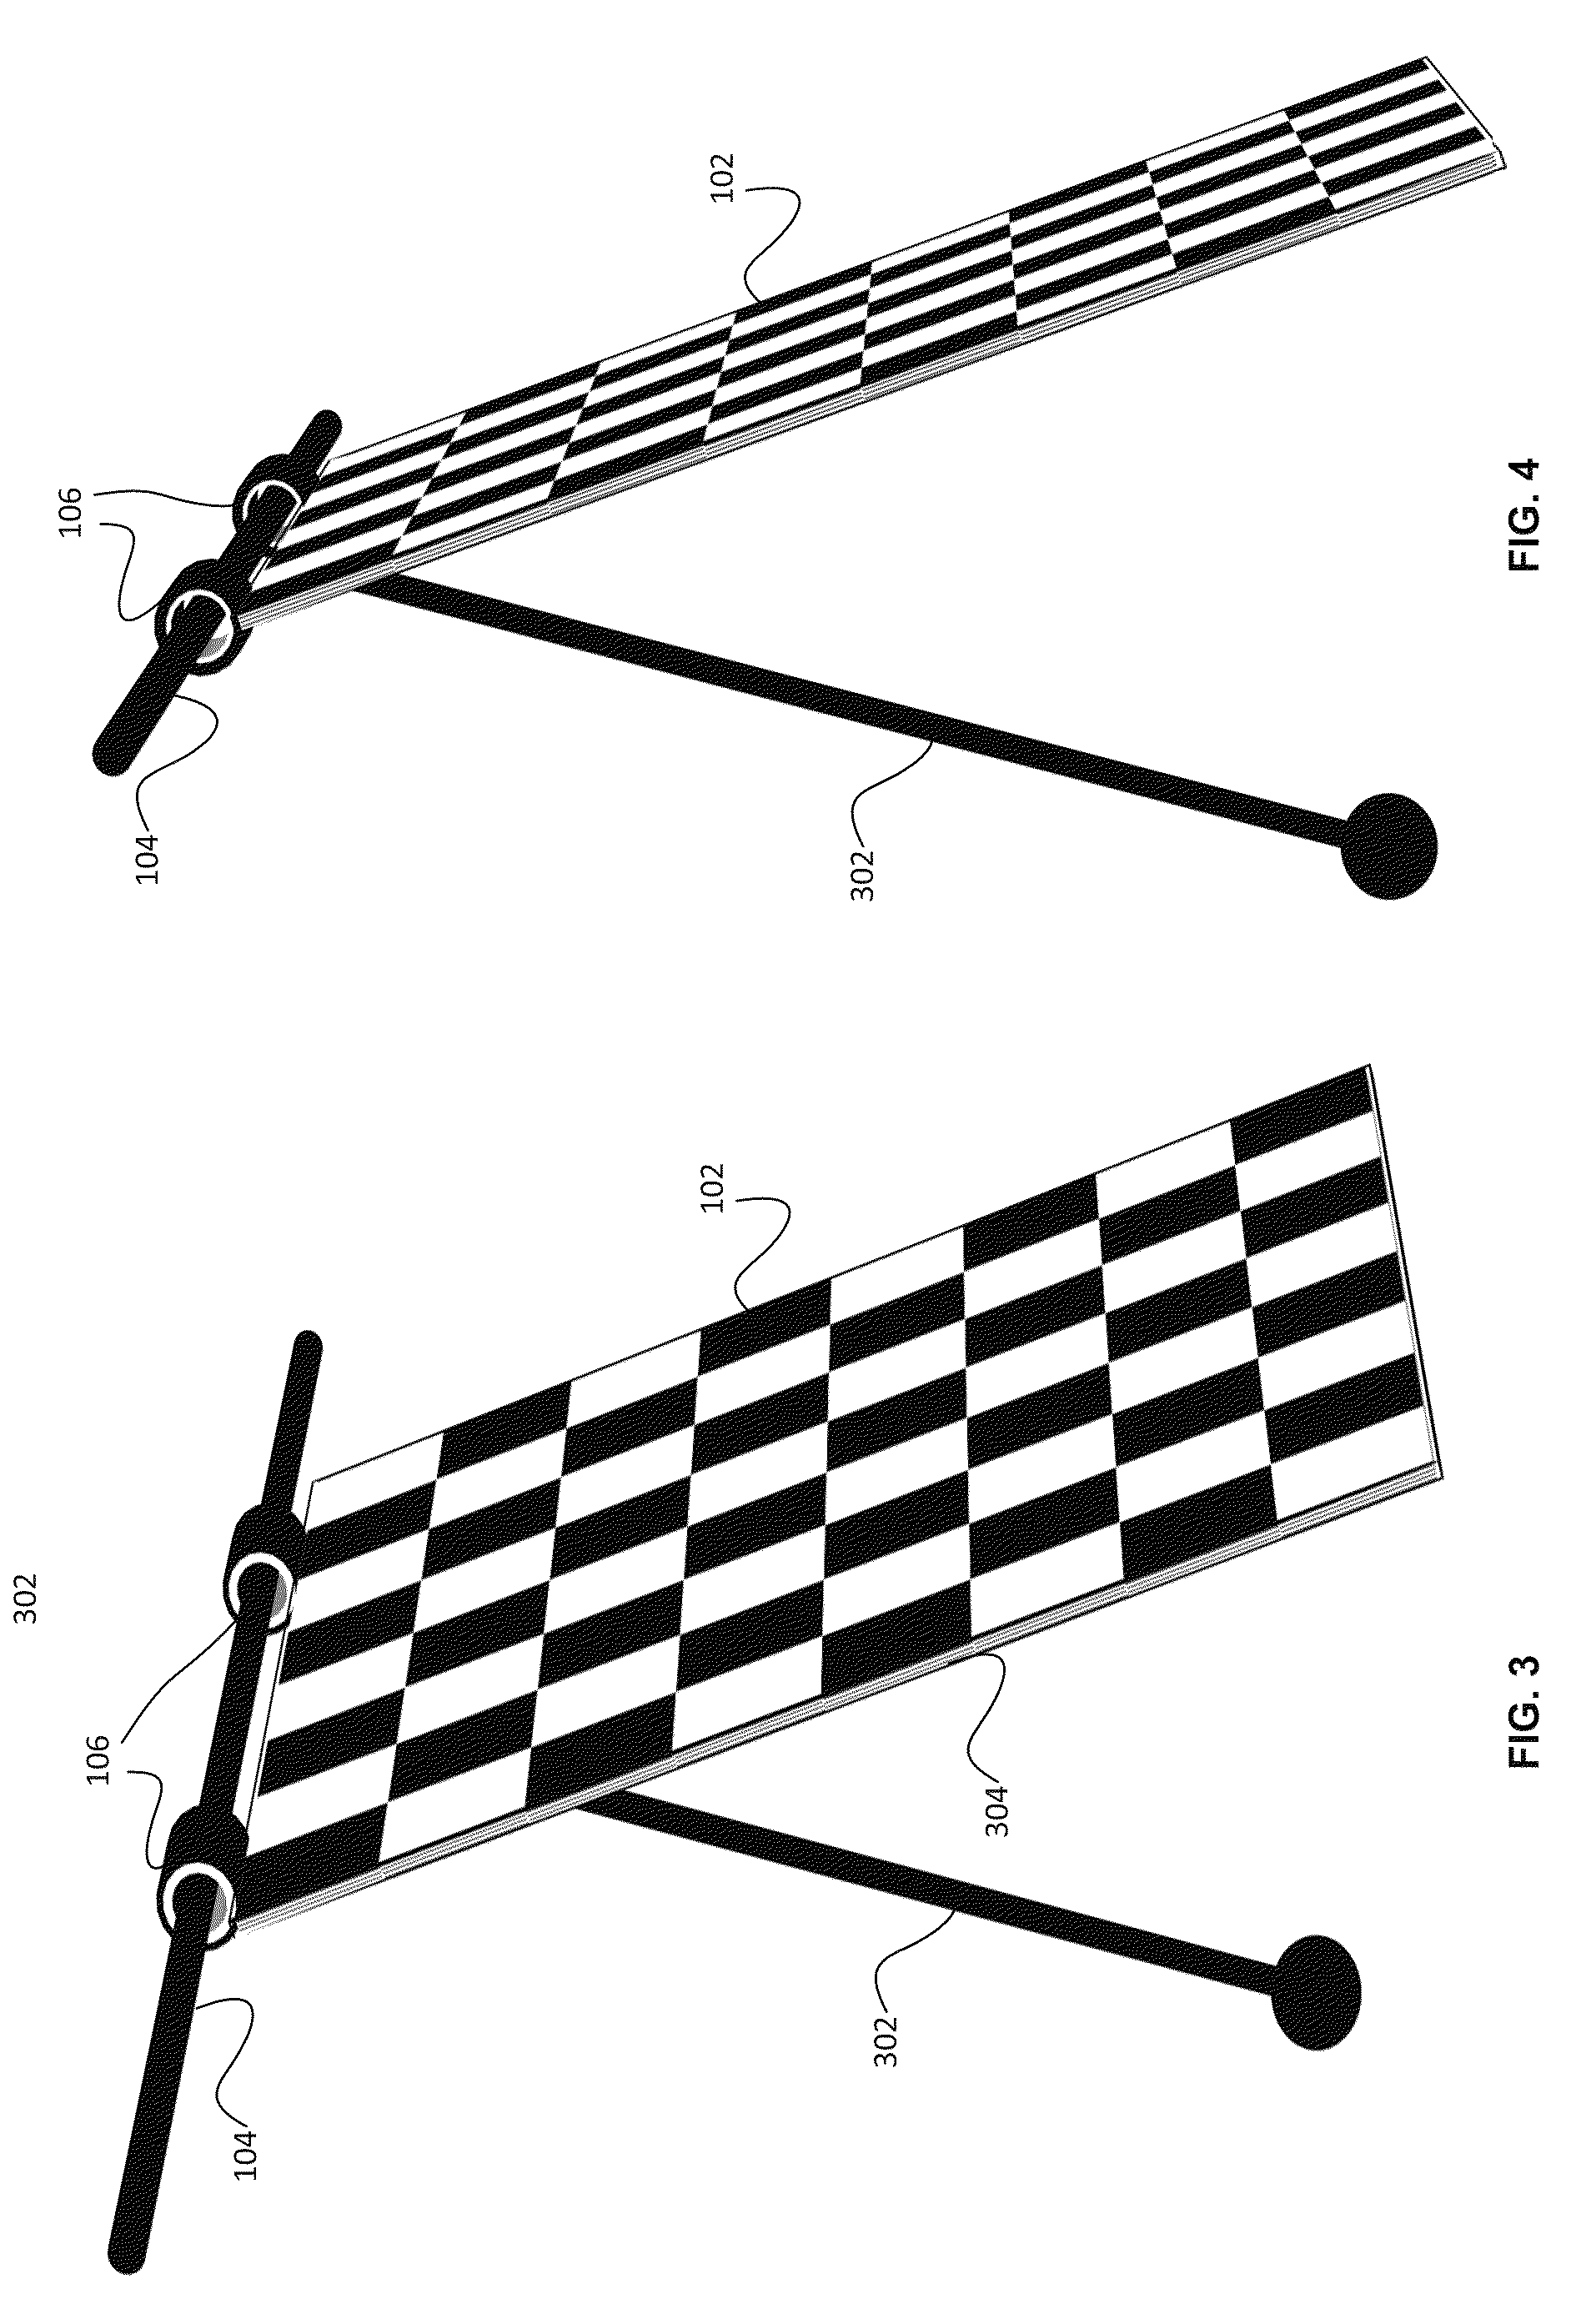 System and method for hanging solar panels from a horizontal support